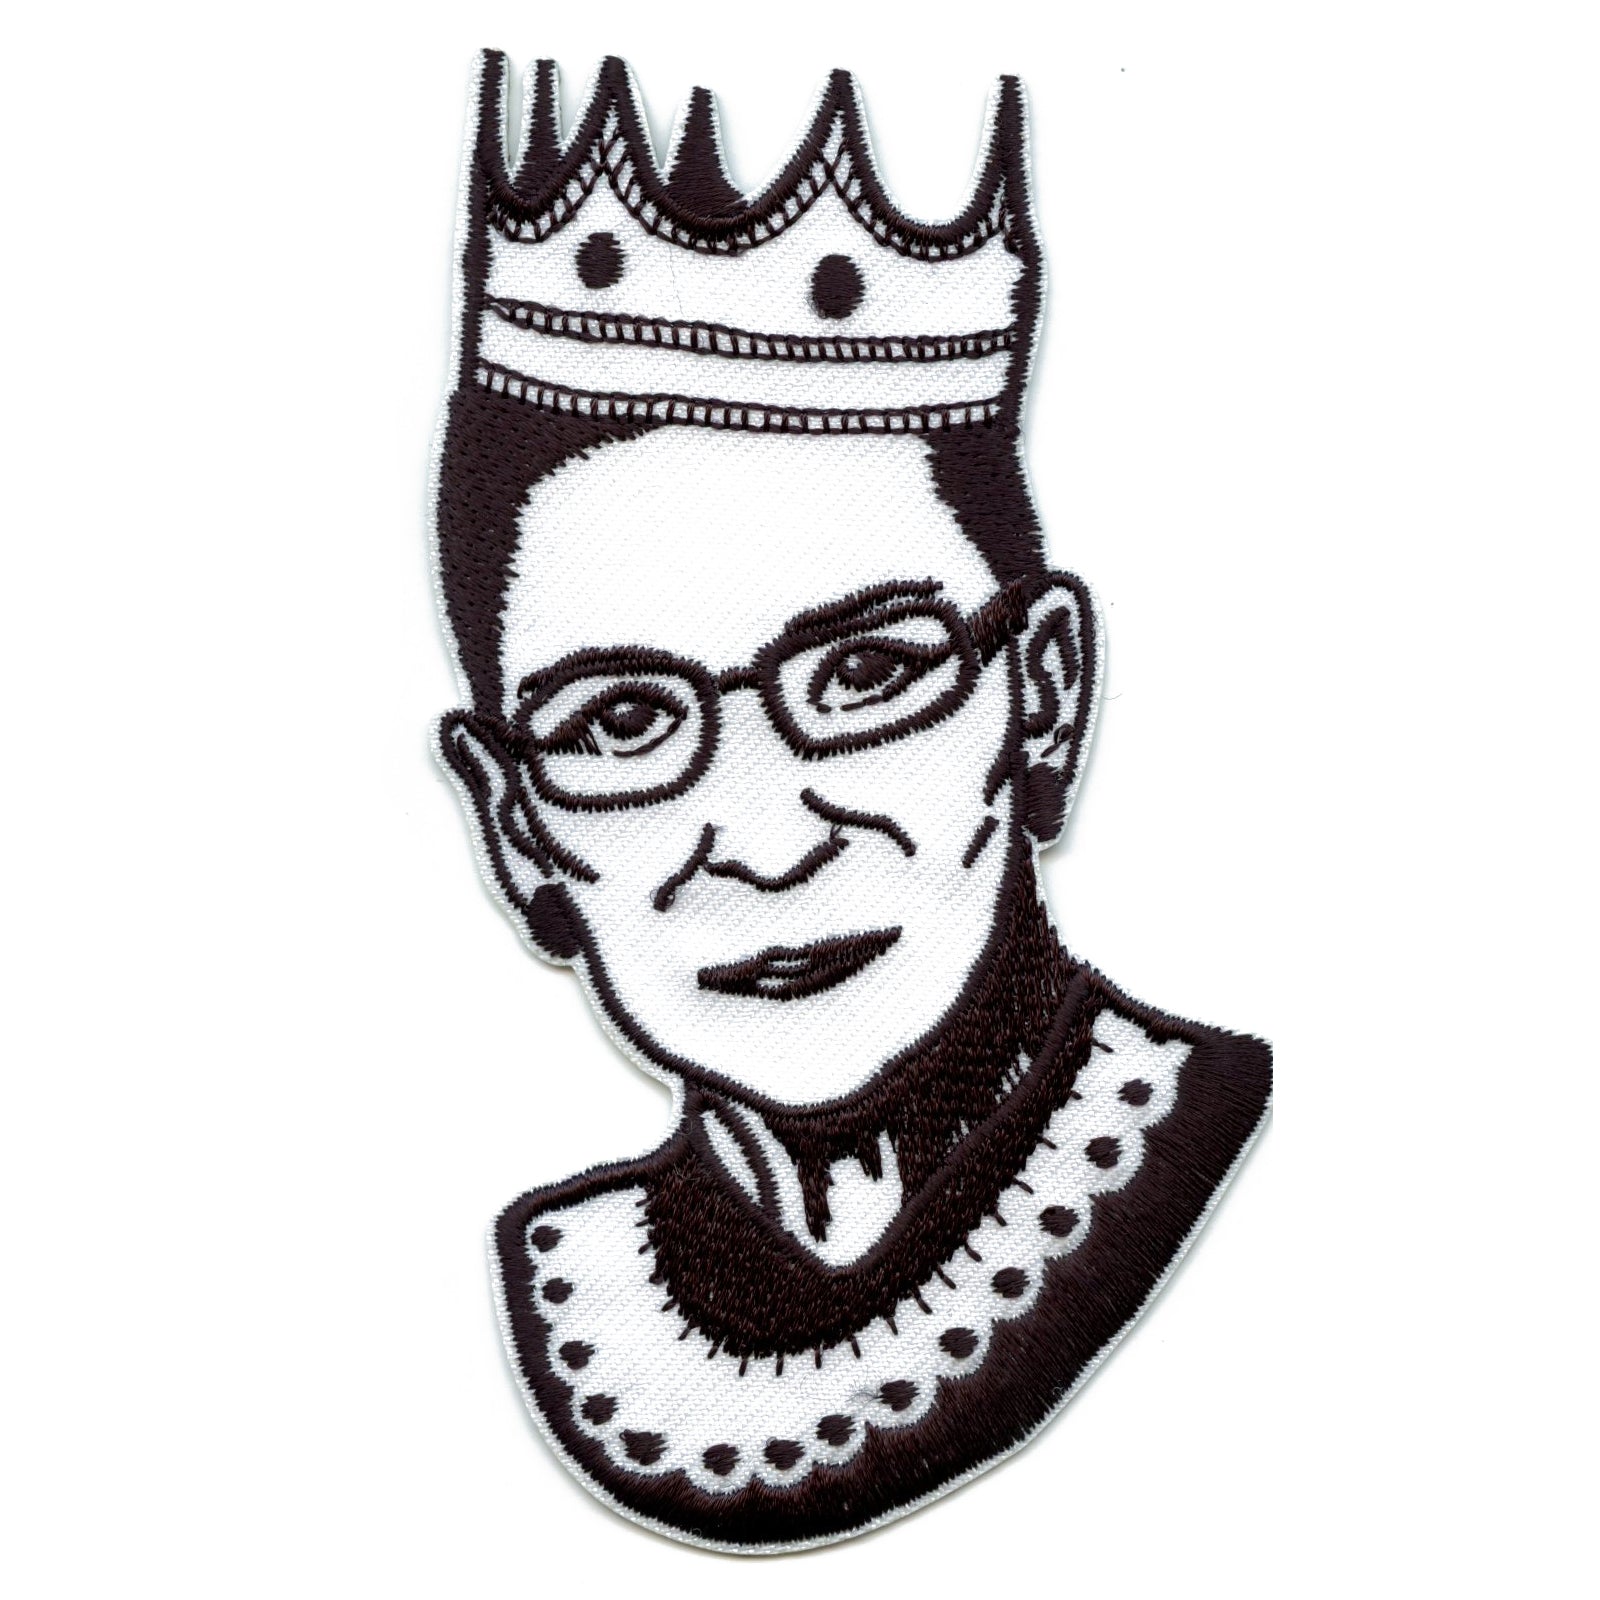 Ruth Bader Ginsburg Portrait With Crown Embroidered Iron On Patch 